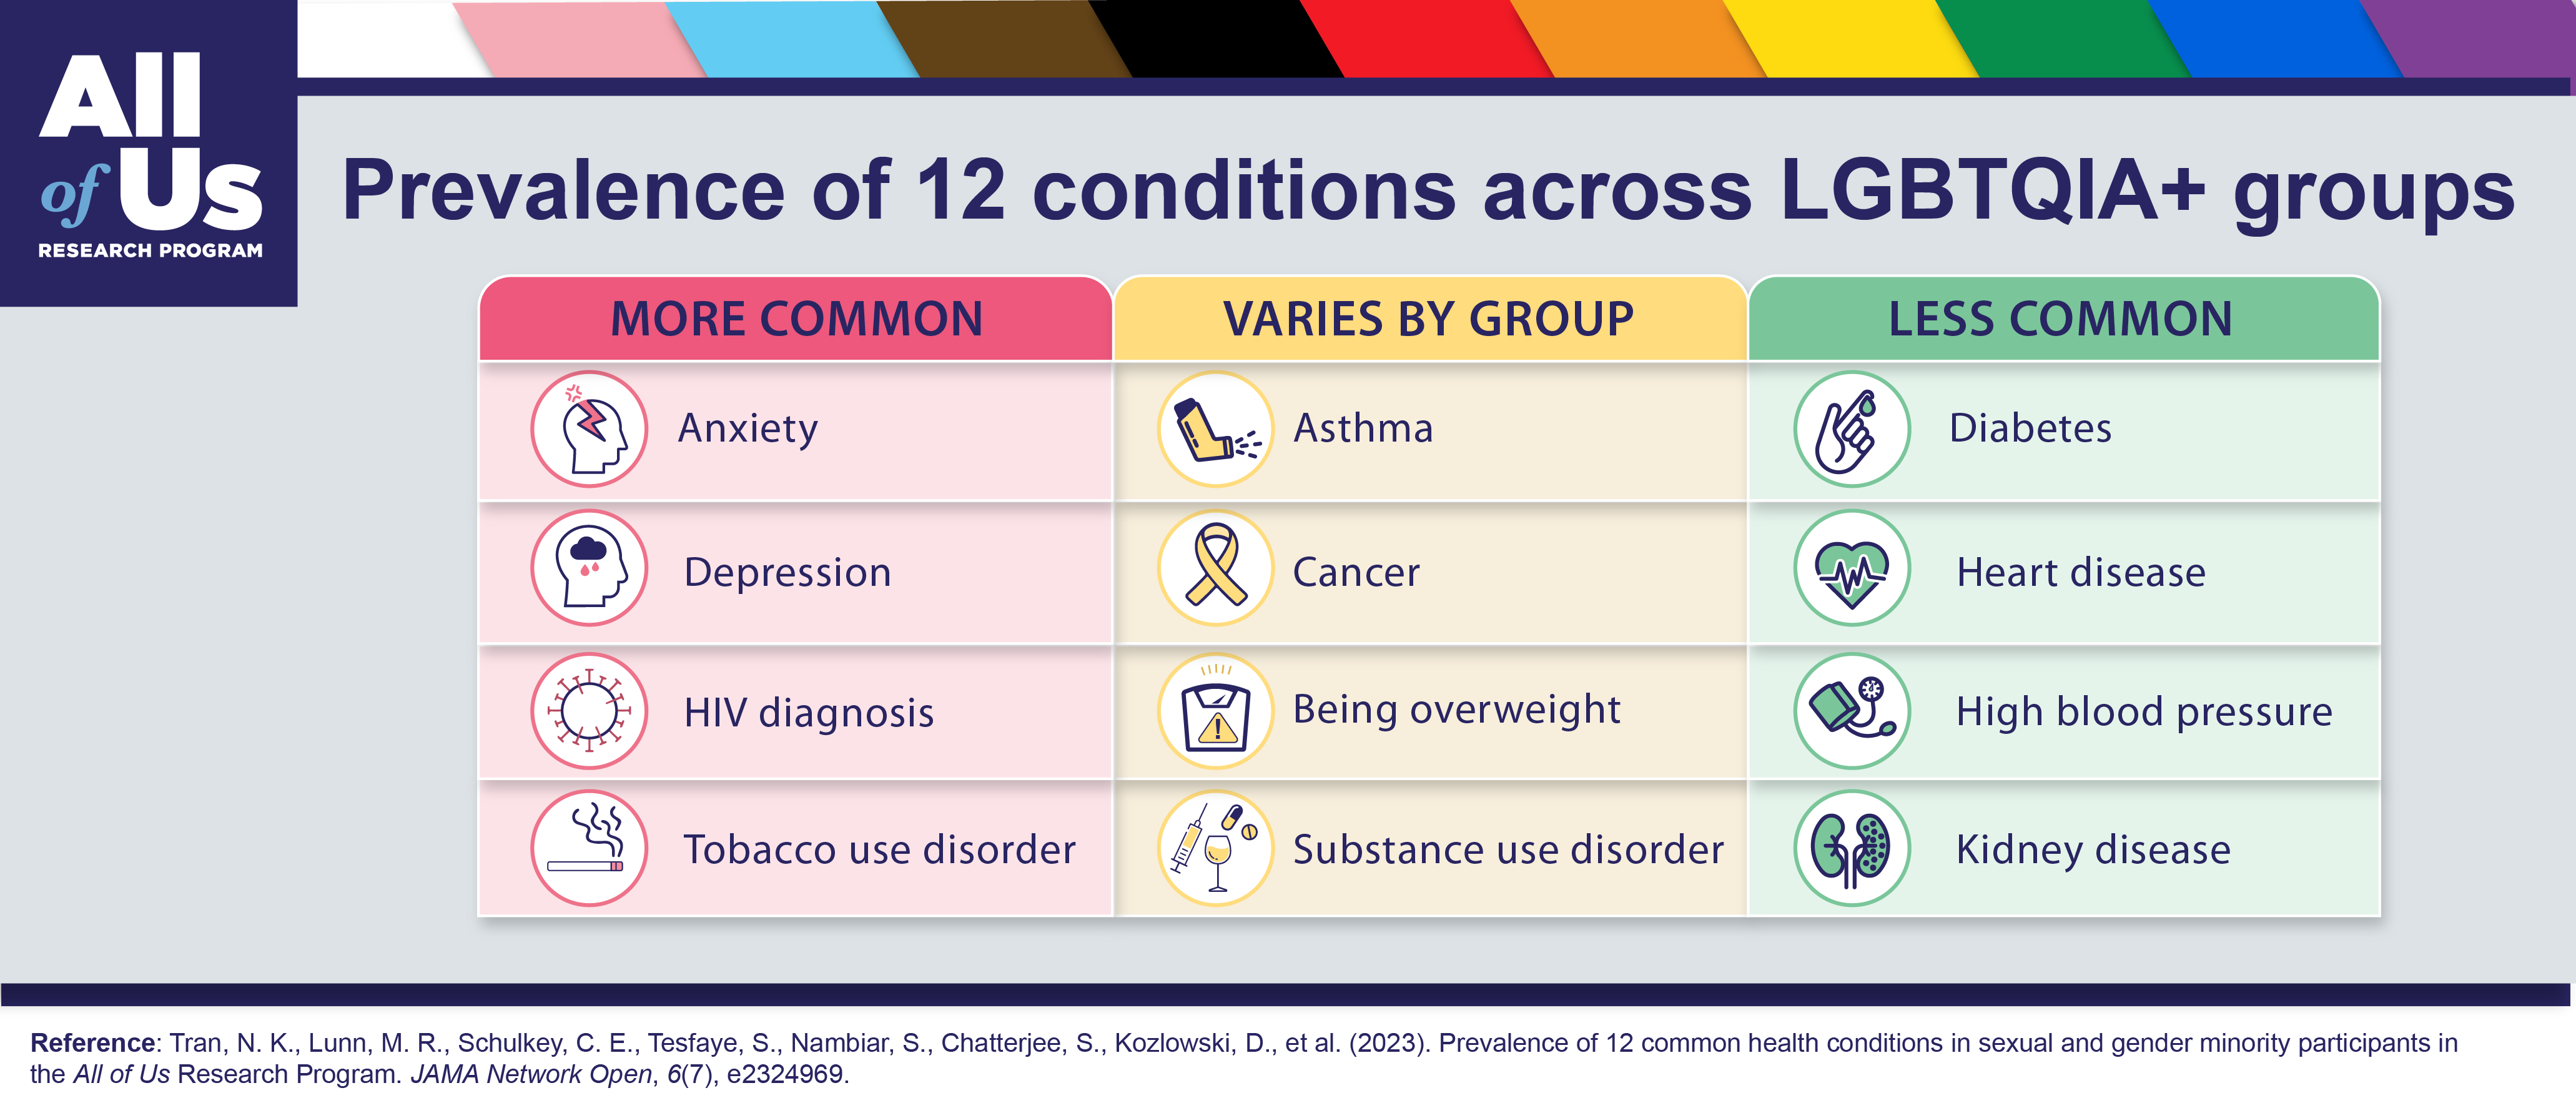 An infographic titled “Prevalence of 12 conditions across LGBTQIA+ groups” with the logo of the All of Us Research Program. Among the 12 conditions, anxiety, depression, HIV diagnosis, and tobacco use disorder are more common; the prevalence of asthma, cancer, being overweight, and substance abuse disorder varies by group; and diabetes, heart disease, high blood pressure, and kidney disease are less common. 